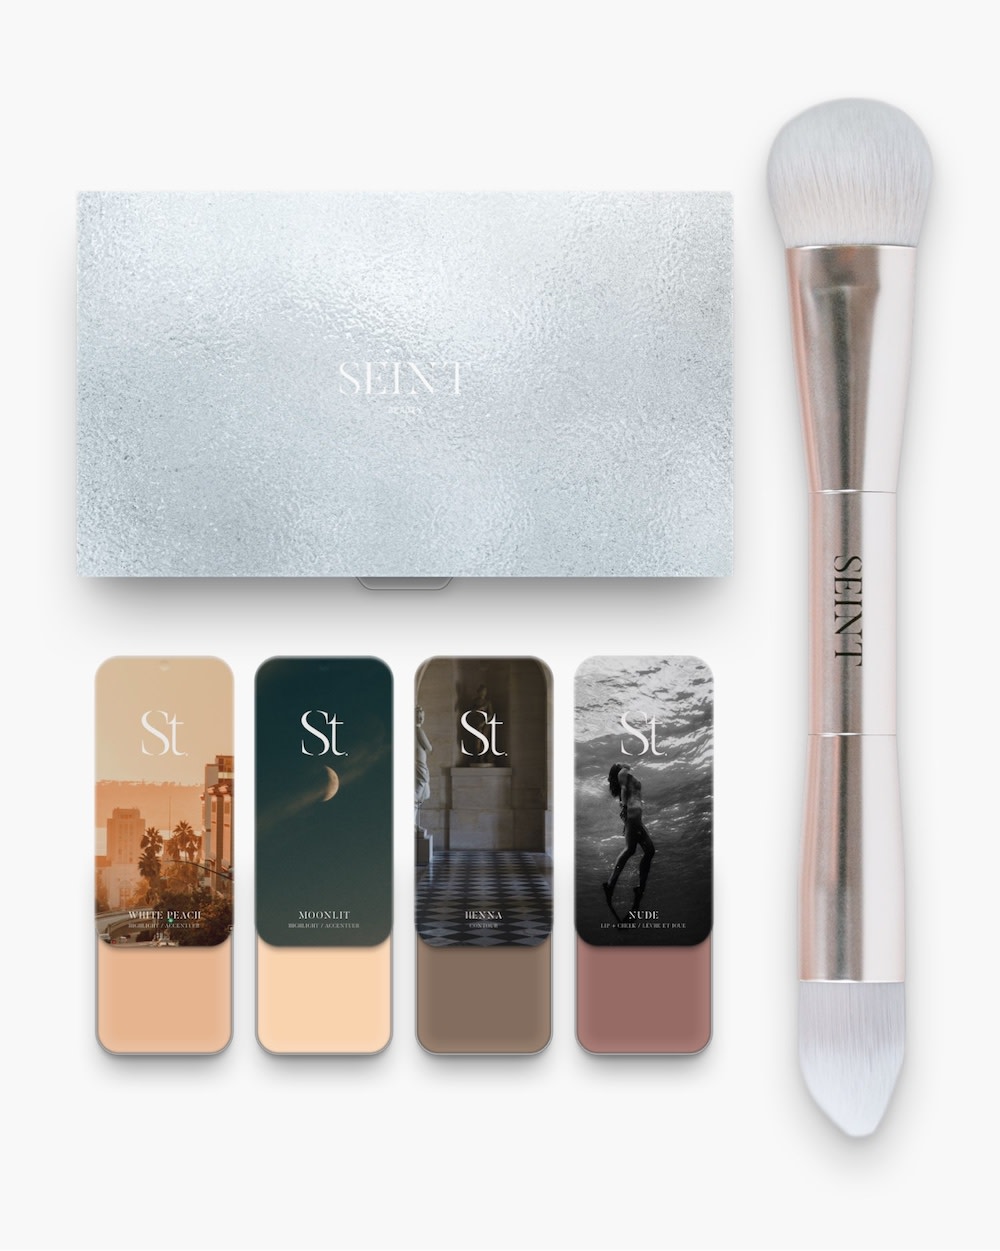 Seint Collections: No Color Match Needed